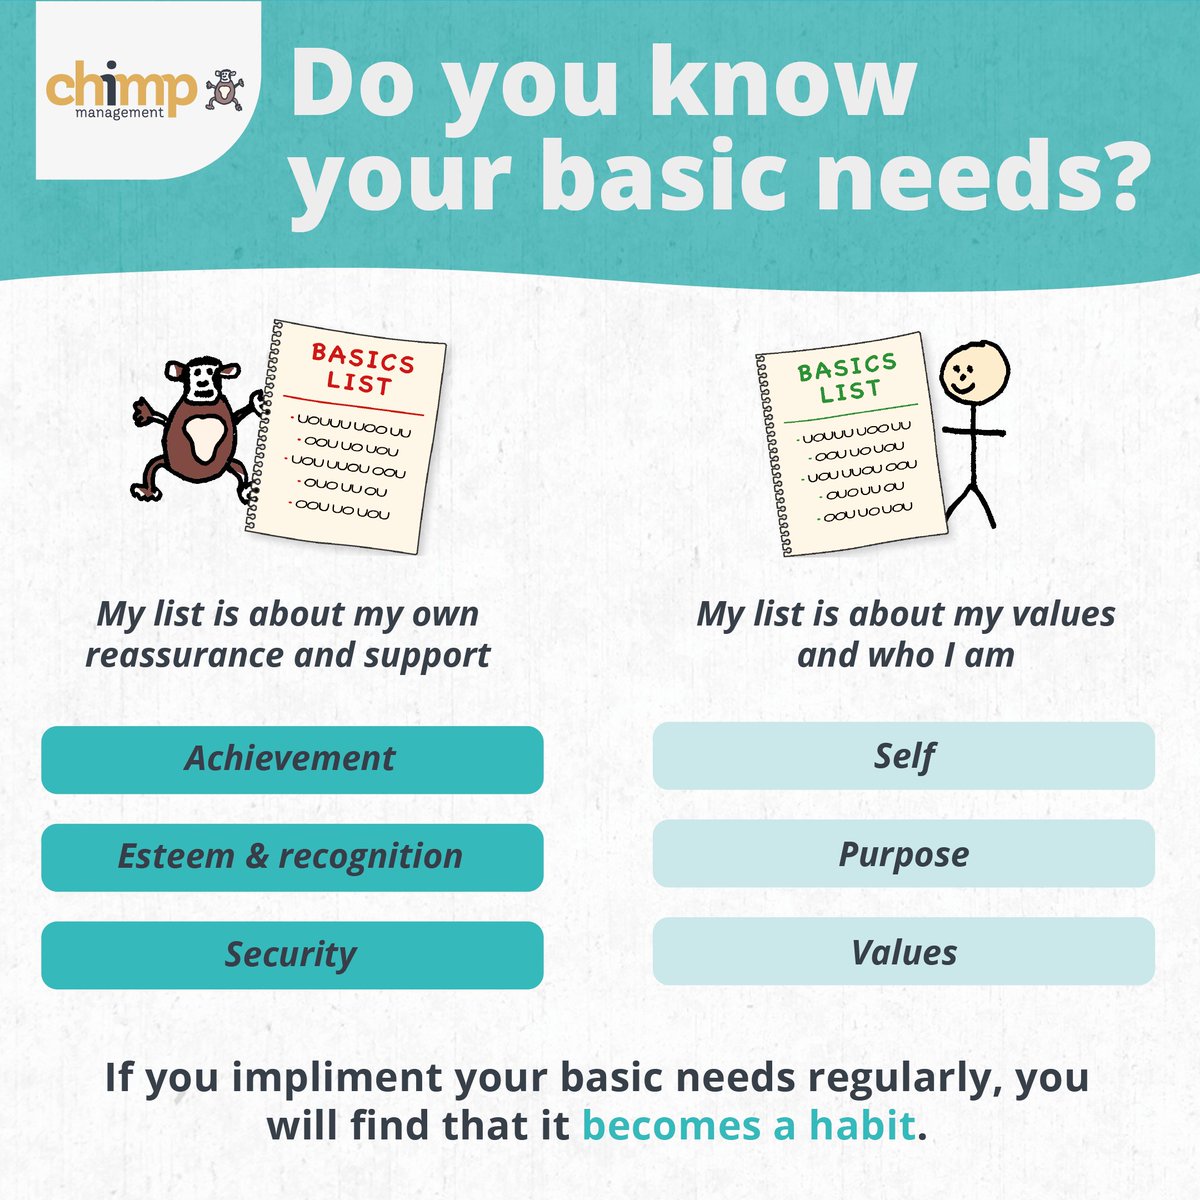 If we put in place the basic needs of both Human and Chimp, then we are less likely to become stressed. 

It is important to practice implementing your basic needs so that it then becomes a habit in your life to look after yourself.

#stress #basicneeds #stressprevention